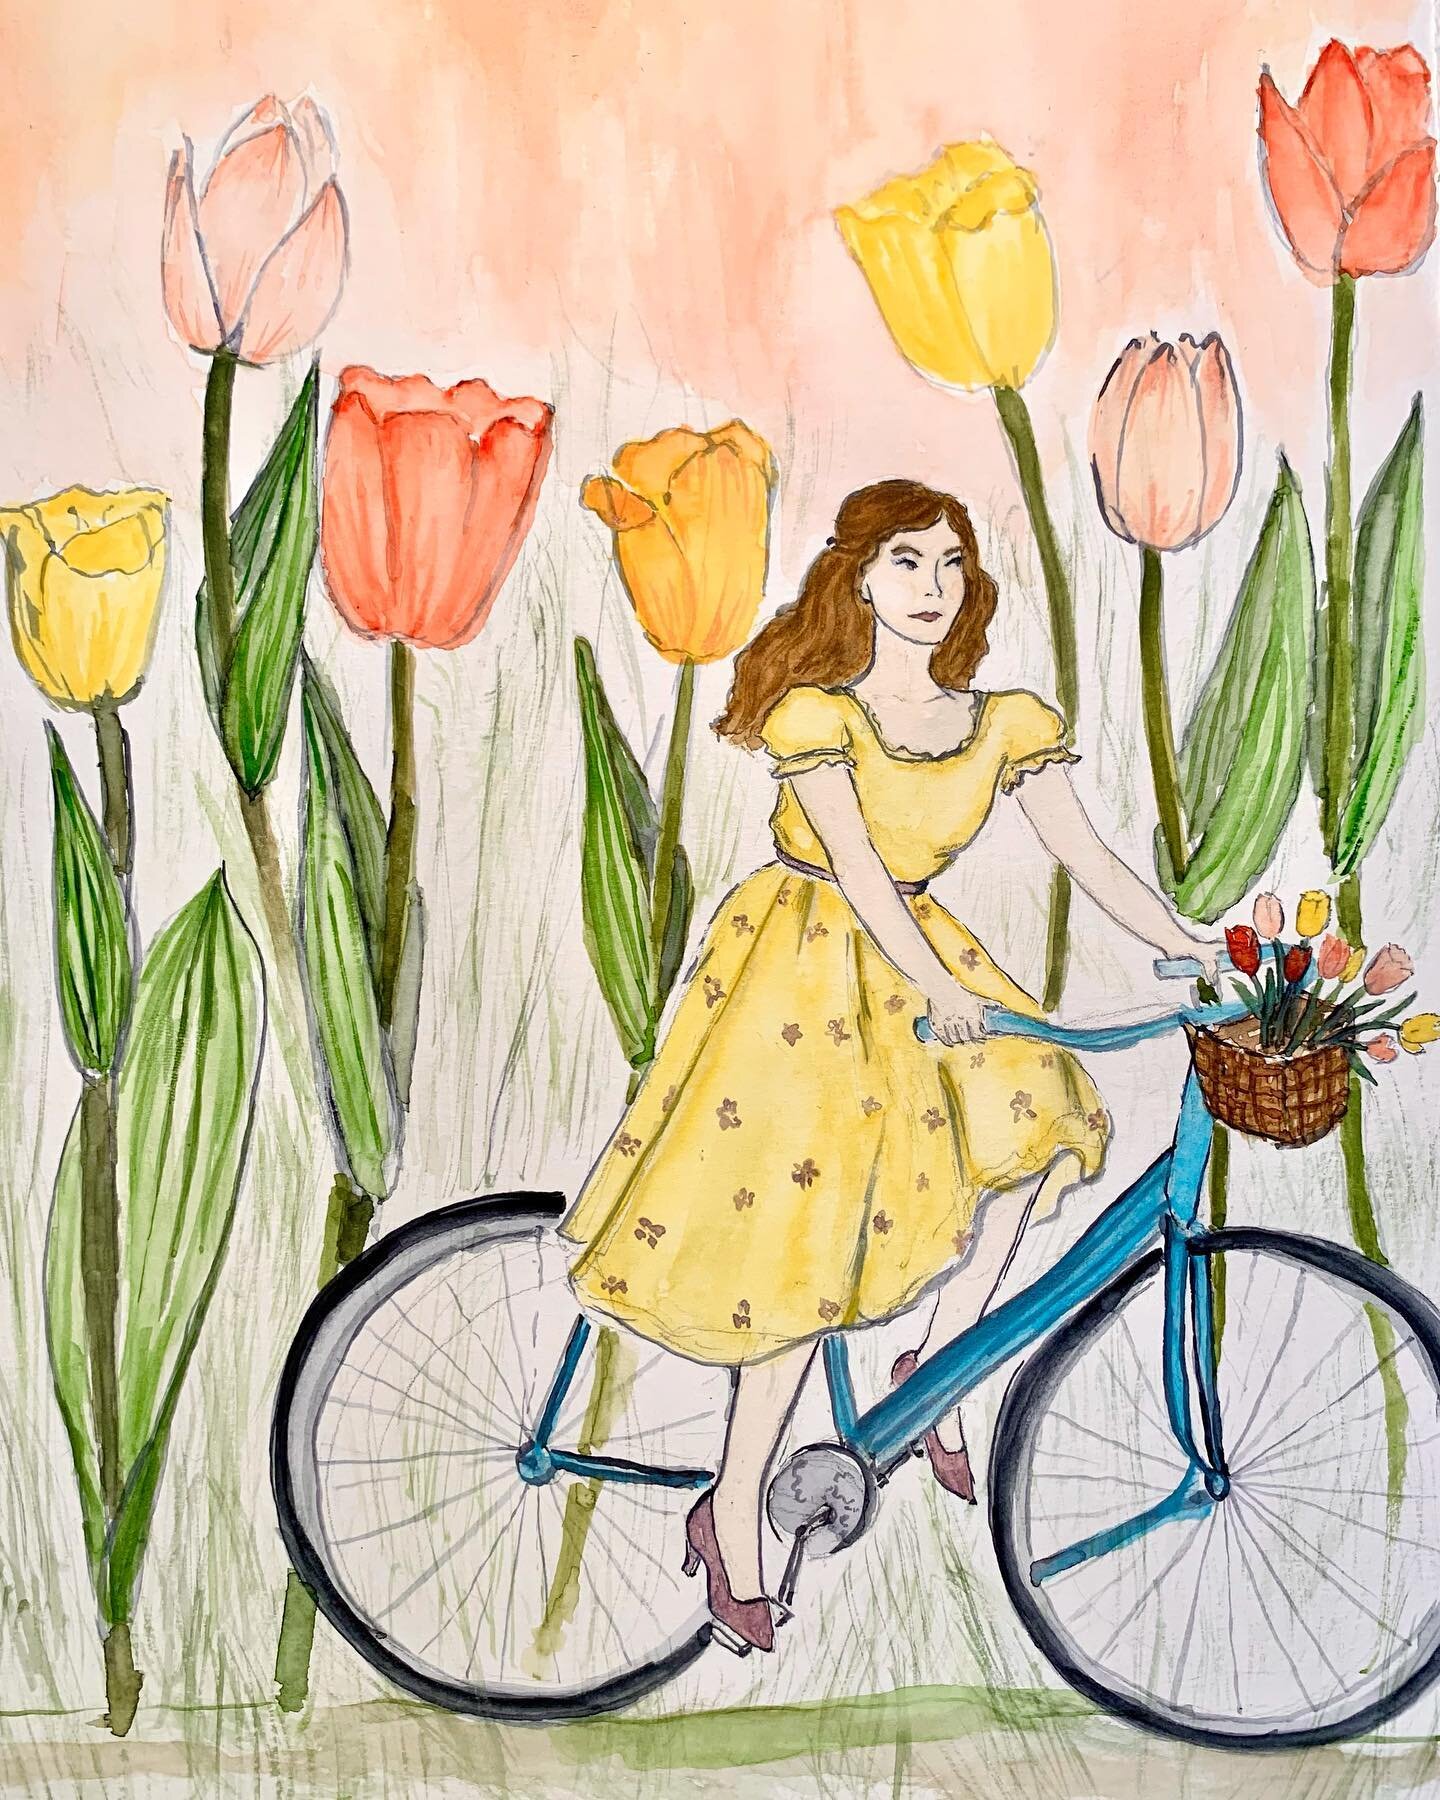 If only tulips were really this tall✨🌷✨#fashionillustration #springtime #tulips #vintagevibes #vintagestyle #7minutesketch #watercolor #inksketch #smallbusiness #ctsmallbusiness